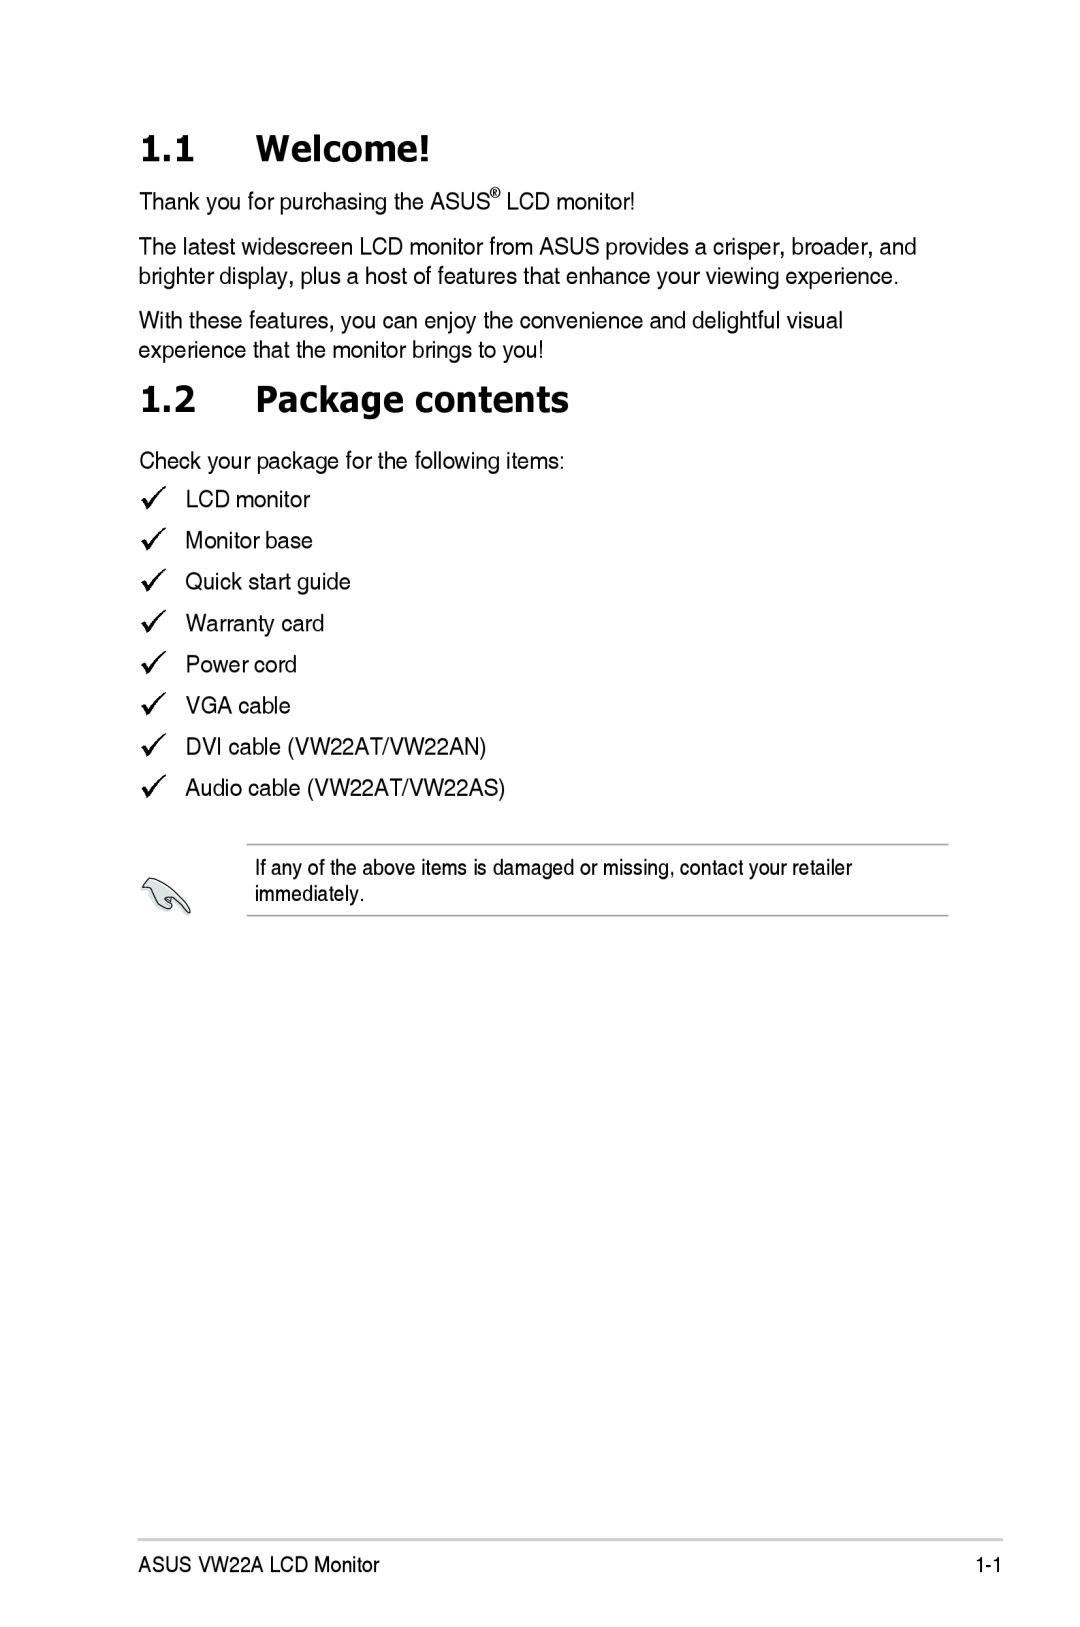 Asus VW22ATCSM manual Welcome, Package contents 